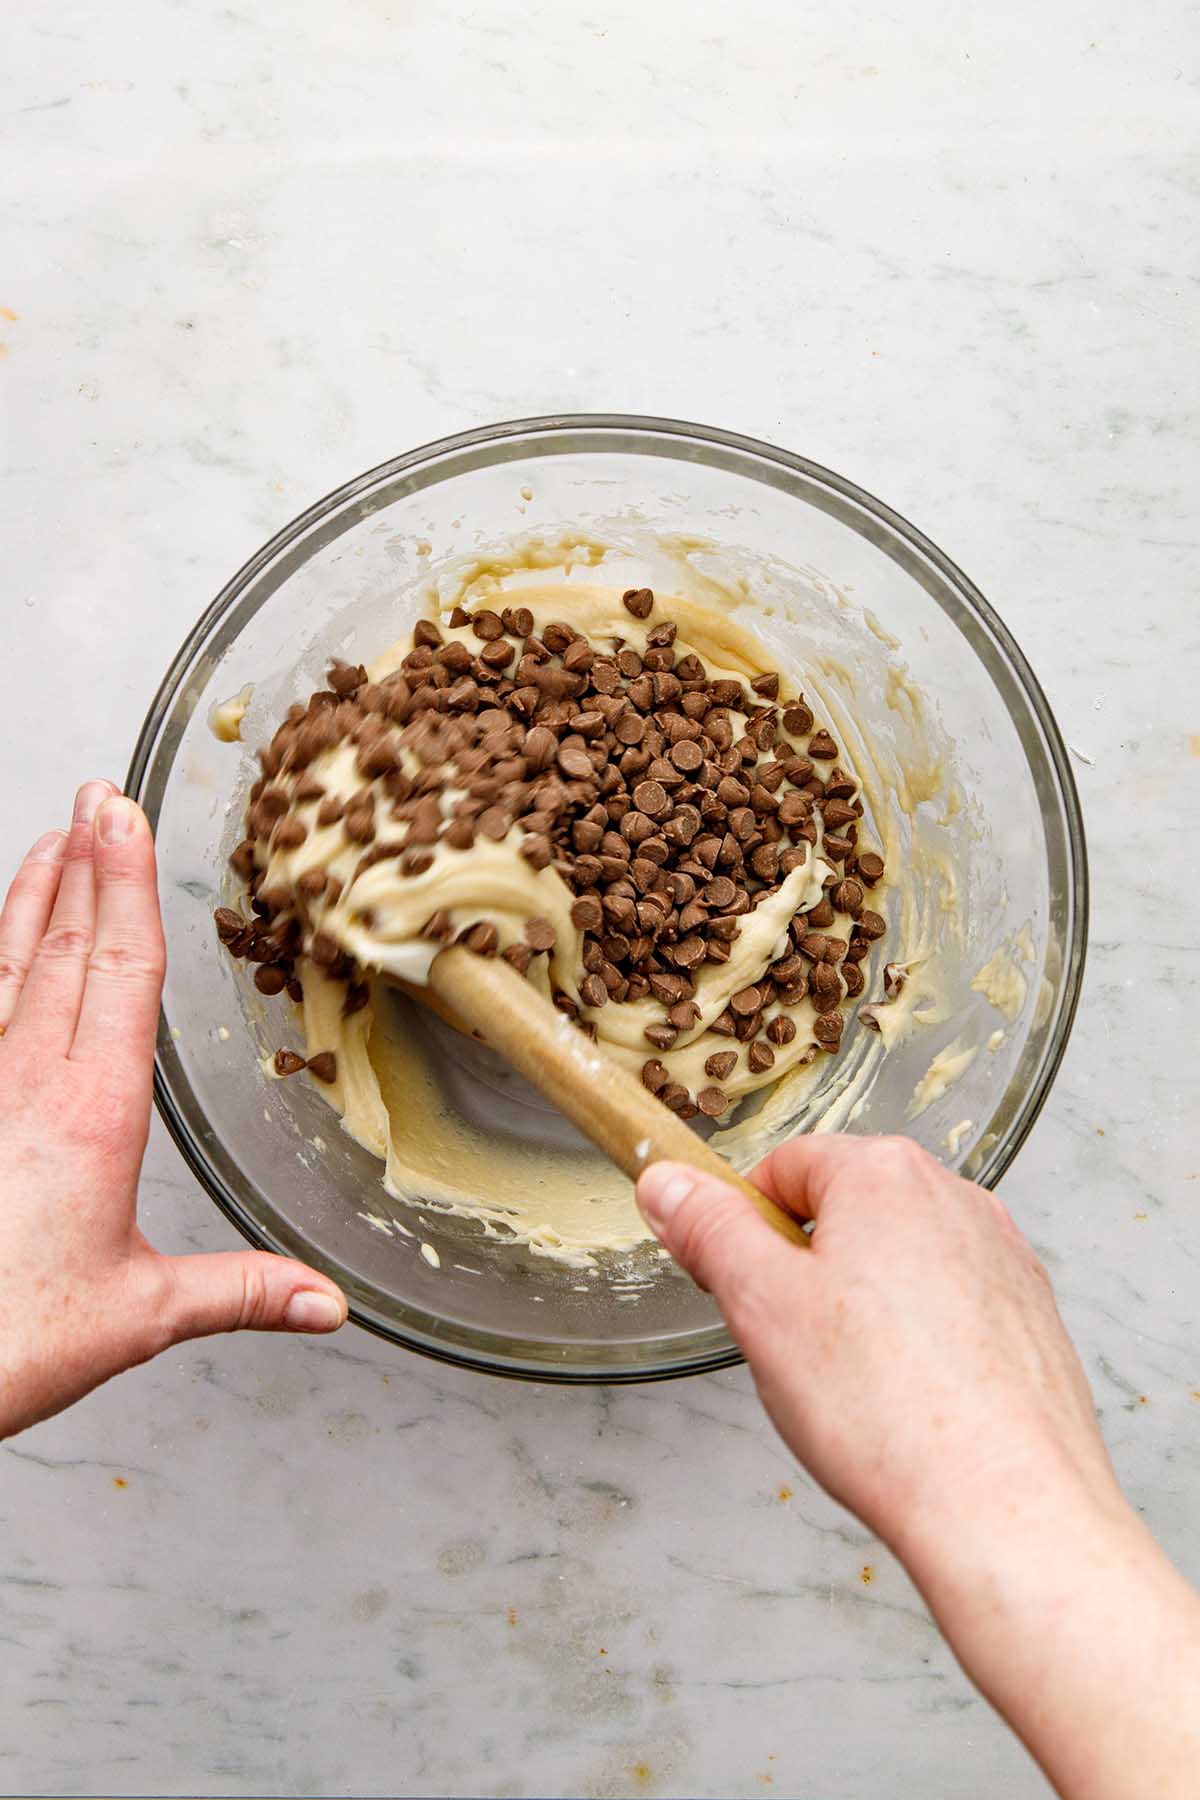 A hand folding chocolate chips into cake batter using a rubber spatula.